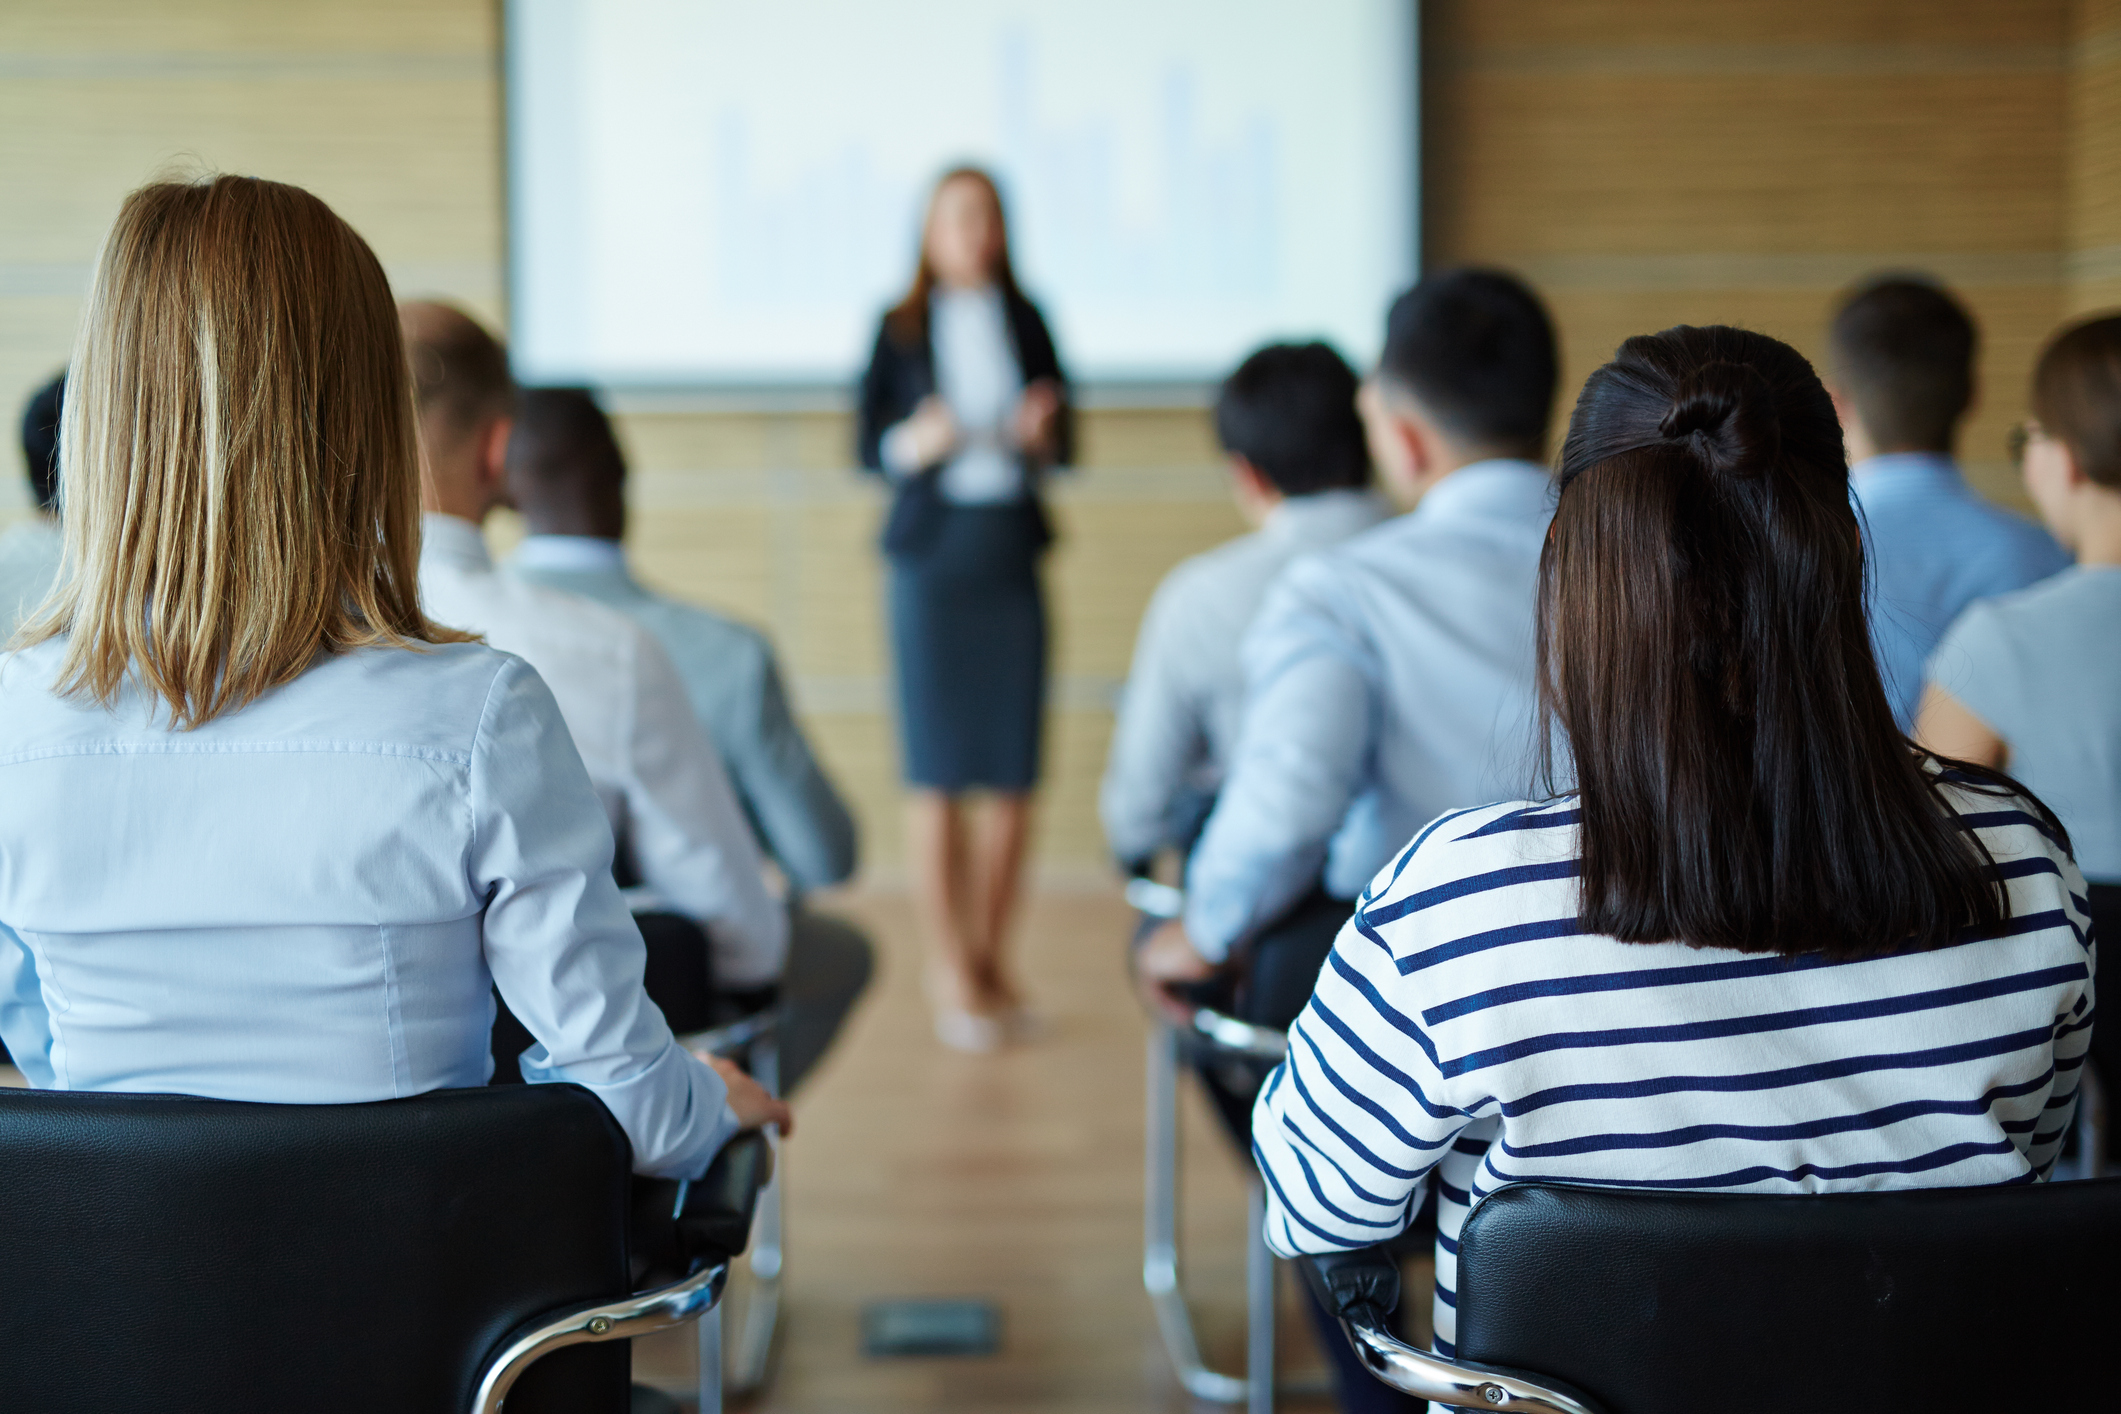 "Public speaking". An interested audience listens to a woman out of focus at the front of a seminar.